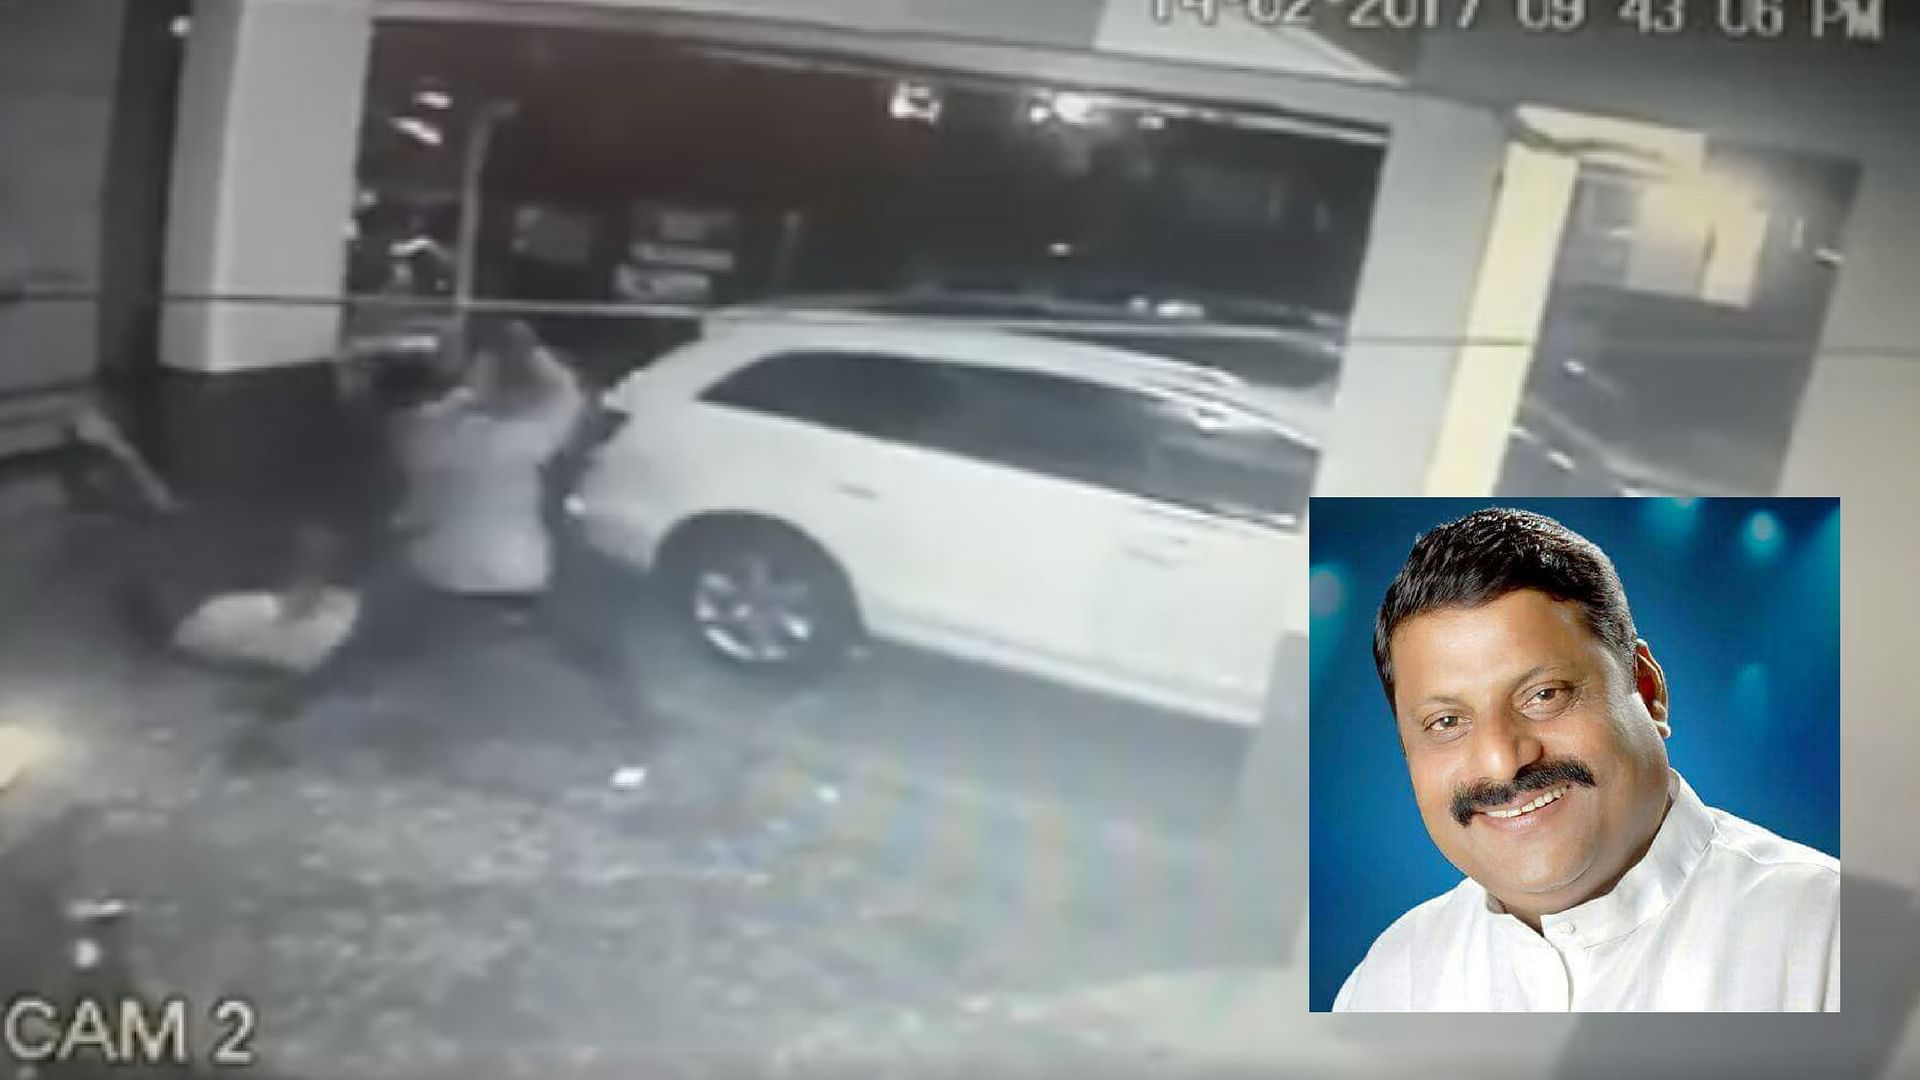 A CCTV at the crime scene has captured the violent murder of Congress leader Manoj Mhatre. (Photo Courtesy: Video Screengrab and <a href="http://bncmc.gov.in/images/">bncmc.gov.in</a>)